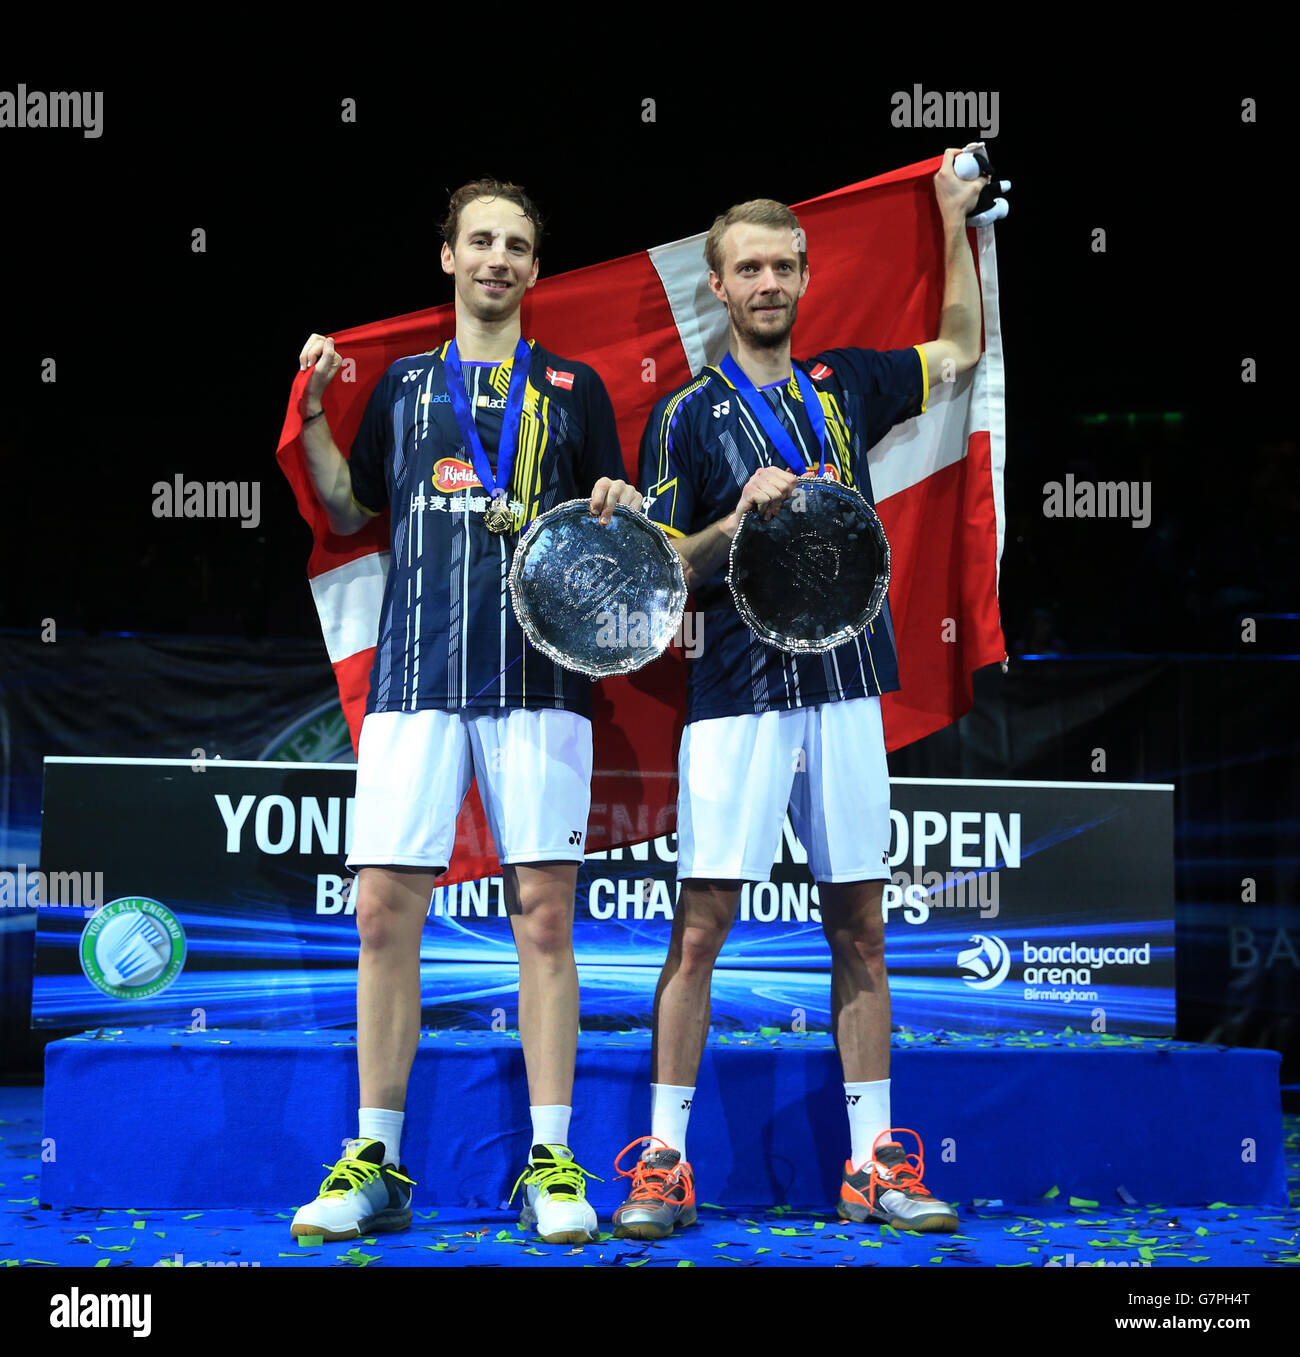 Denmark's Mathias Boe (left) and Casten Mogensen (right) celebrates after winning the Mens Doubles beating China's Fu Haifeng and Zhang Nan during The Yonex All England Open 2015 Stock Photo